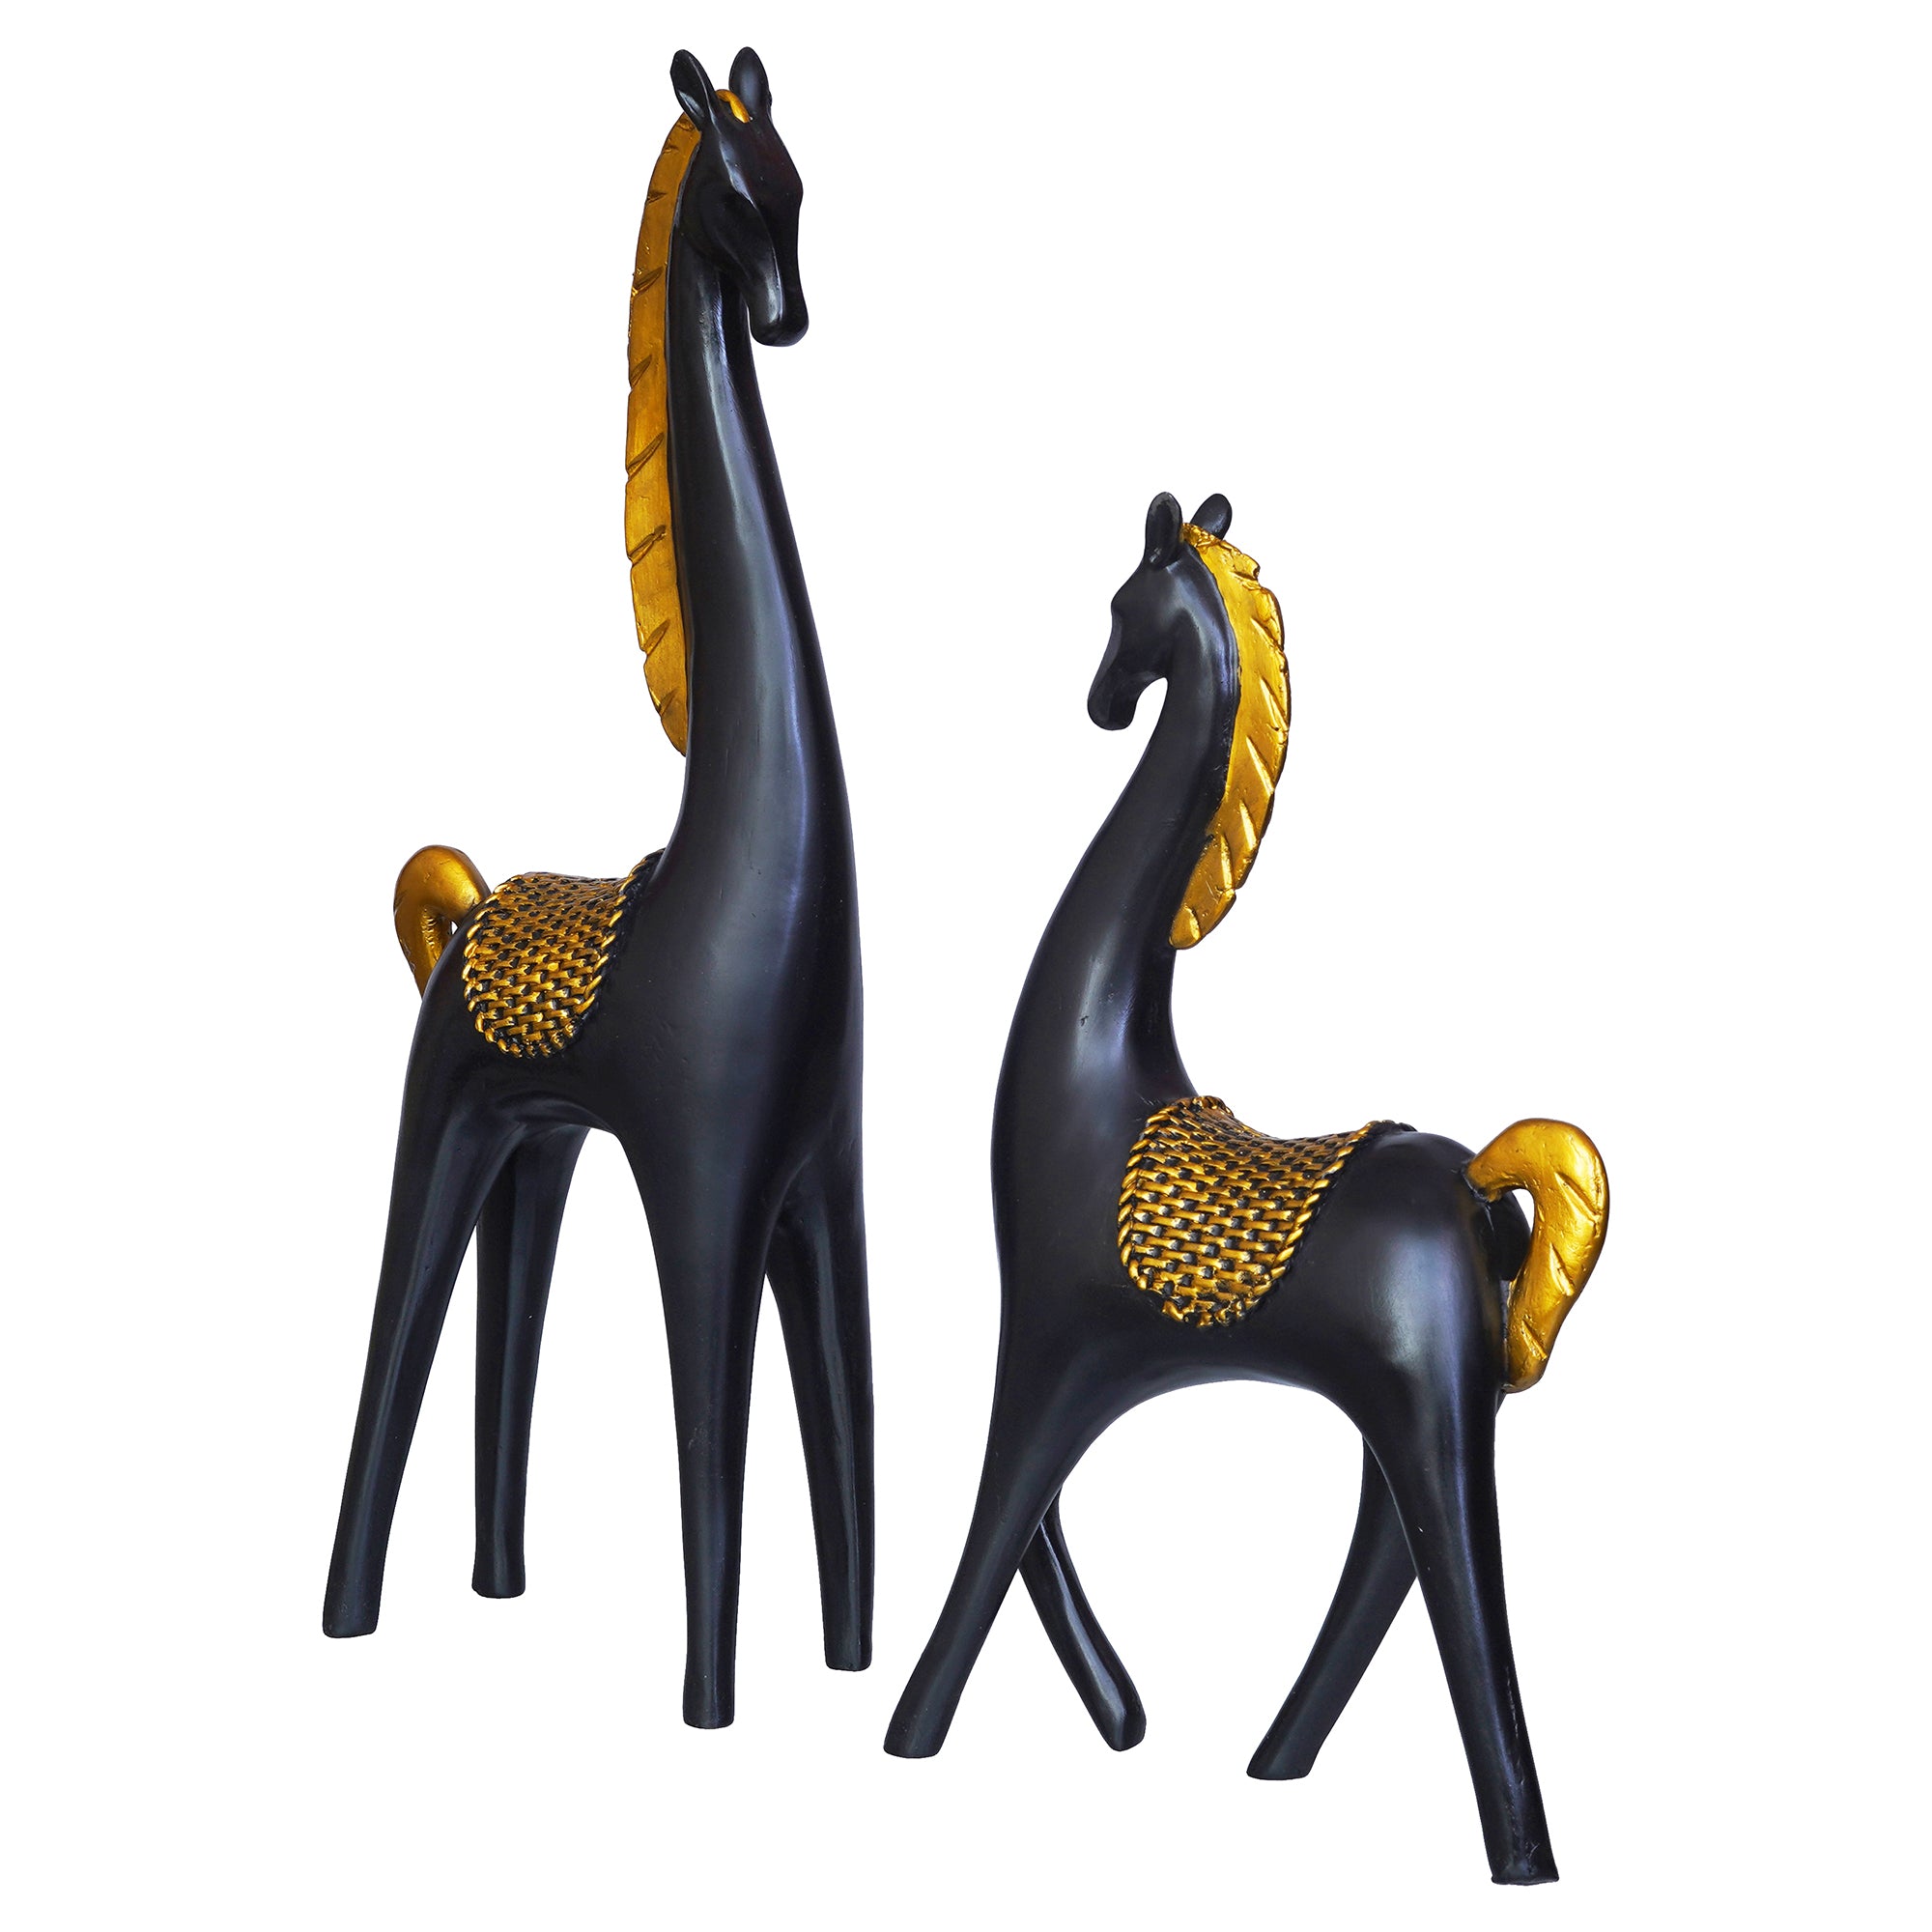 Set of 2 Black Horse Statues with Golden Hair Decorative Animal Figurines 8